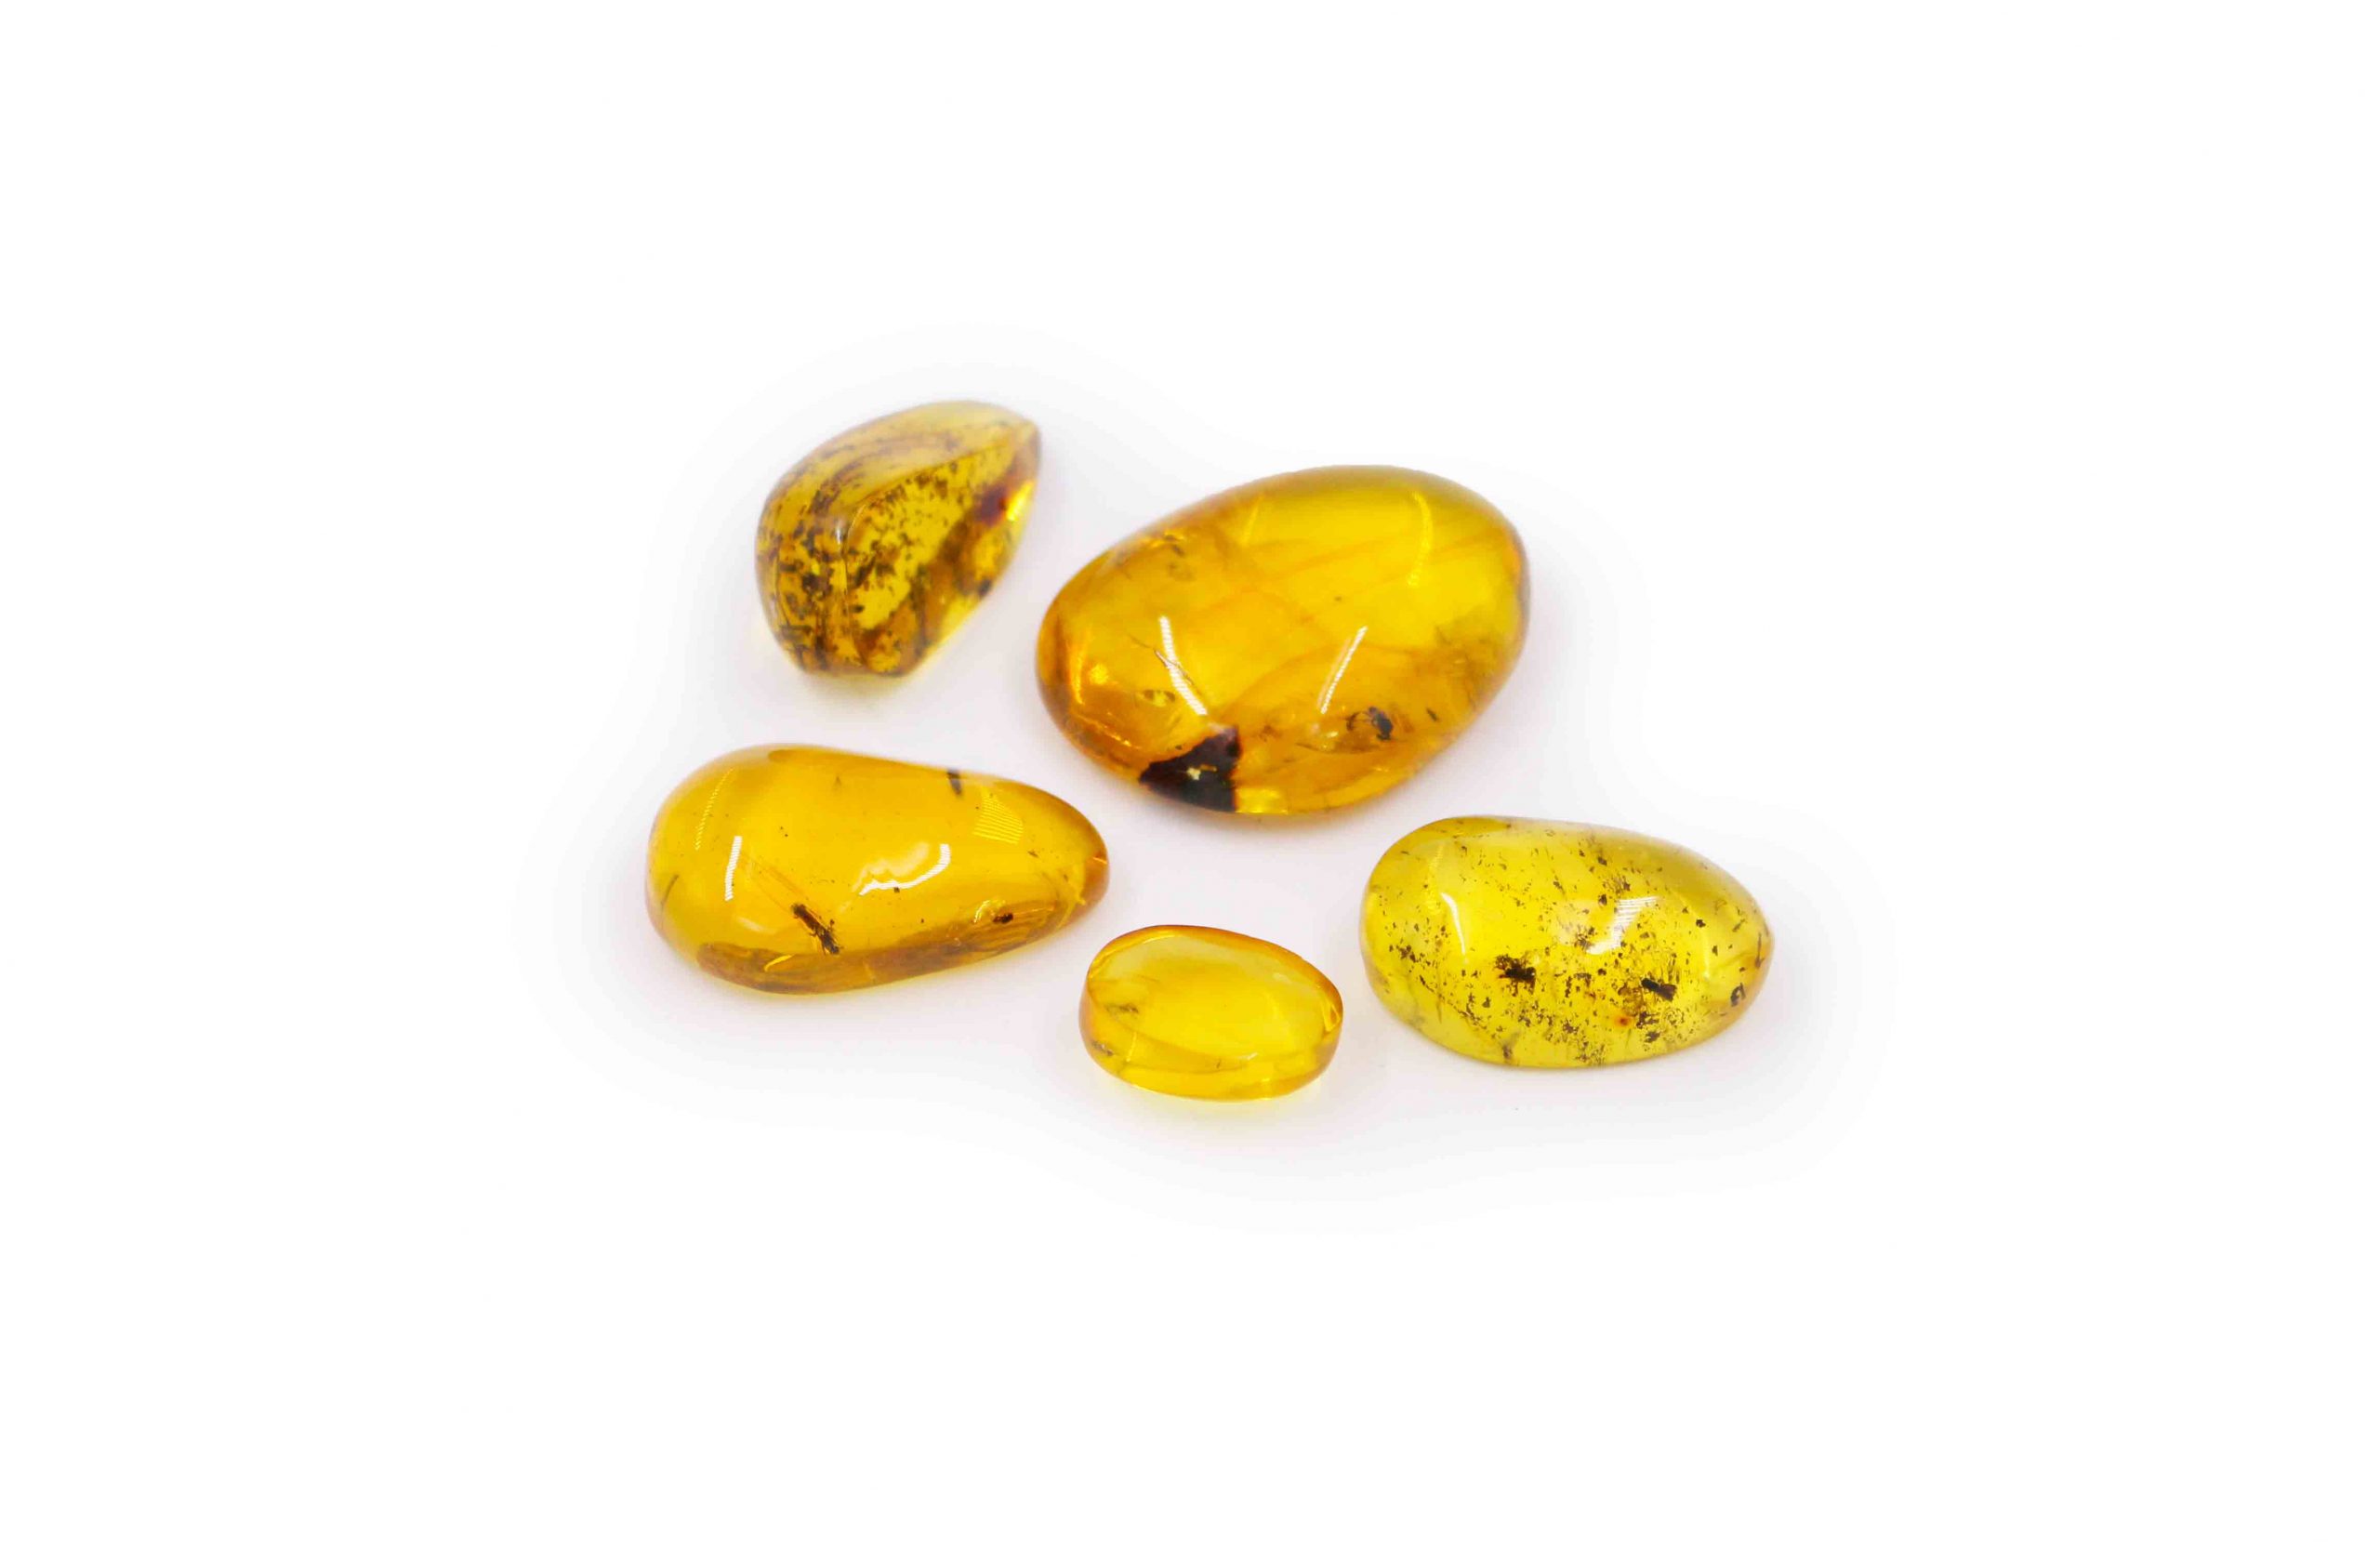 Amber with fossil insect polished gem - Crystal Dreams